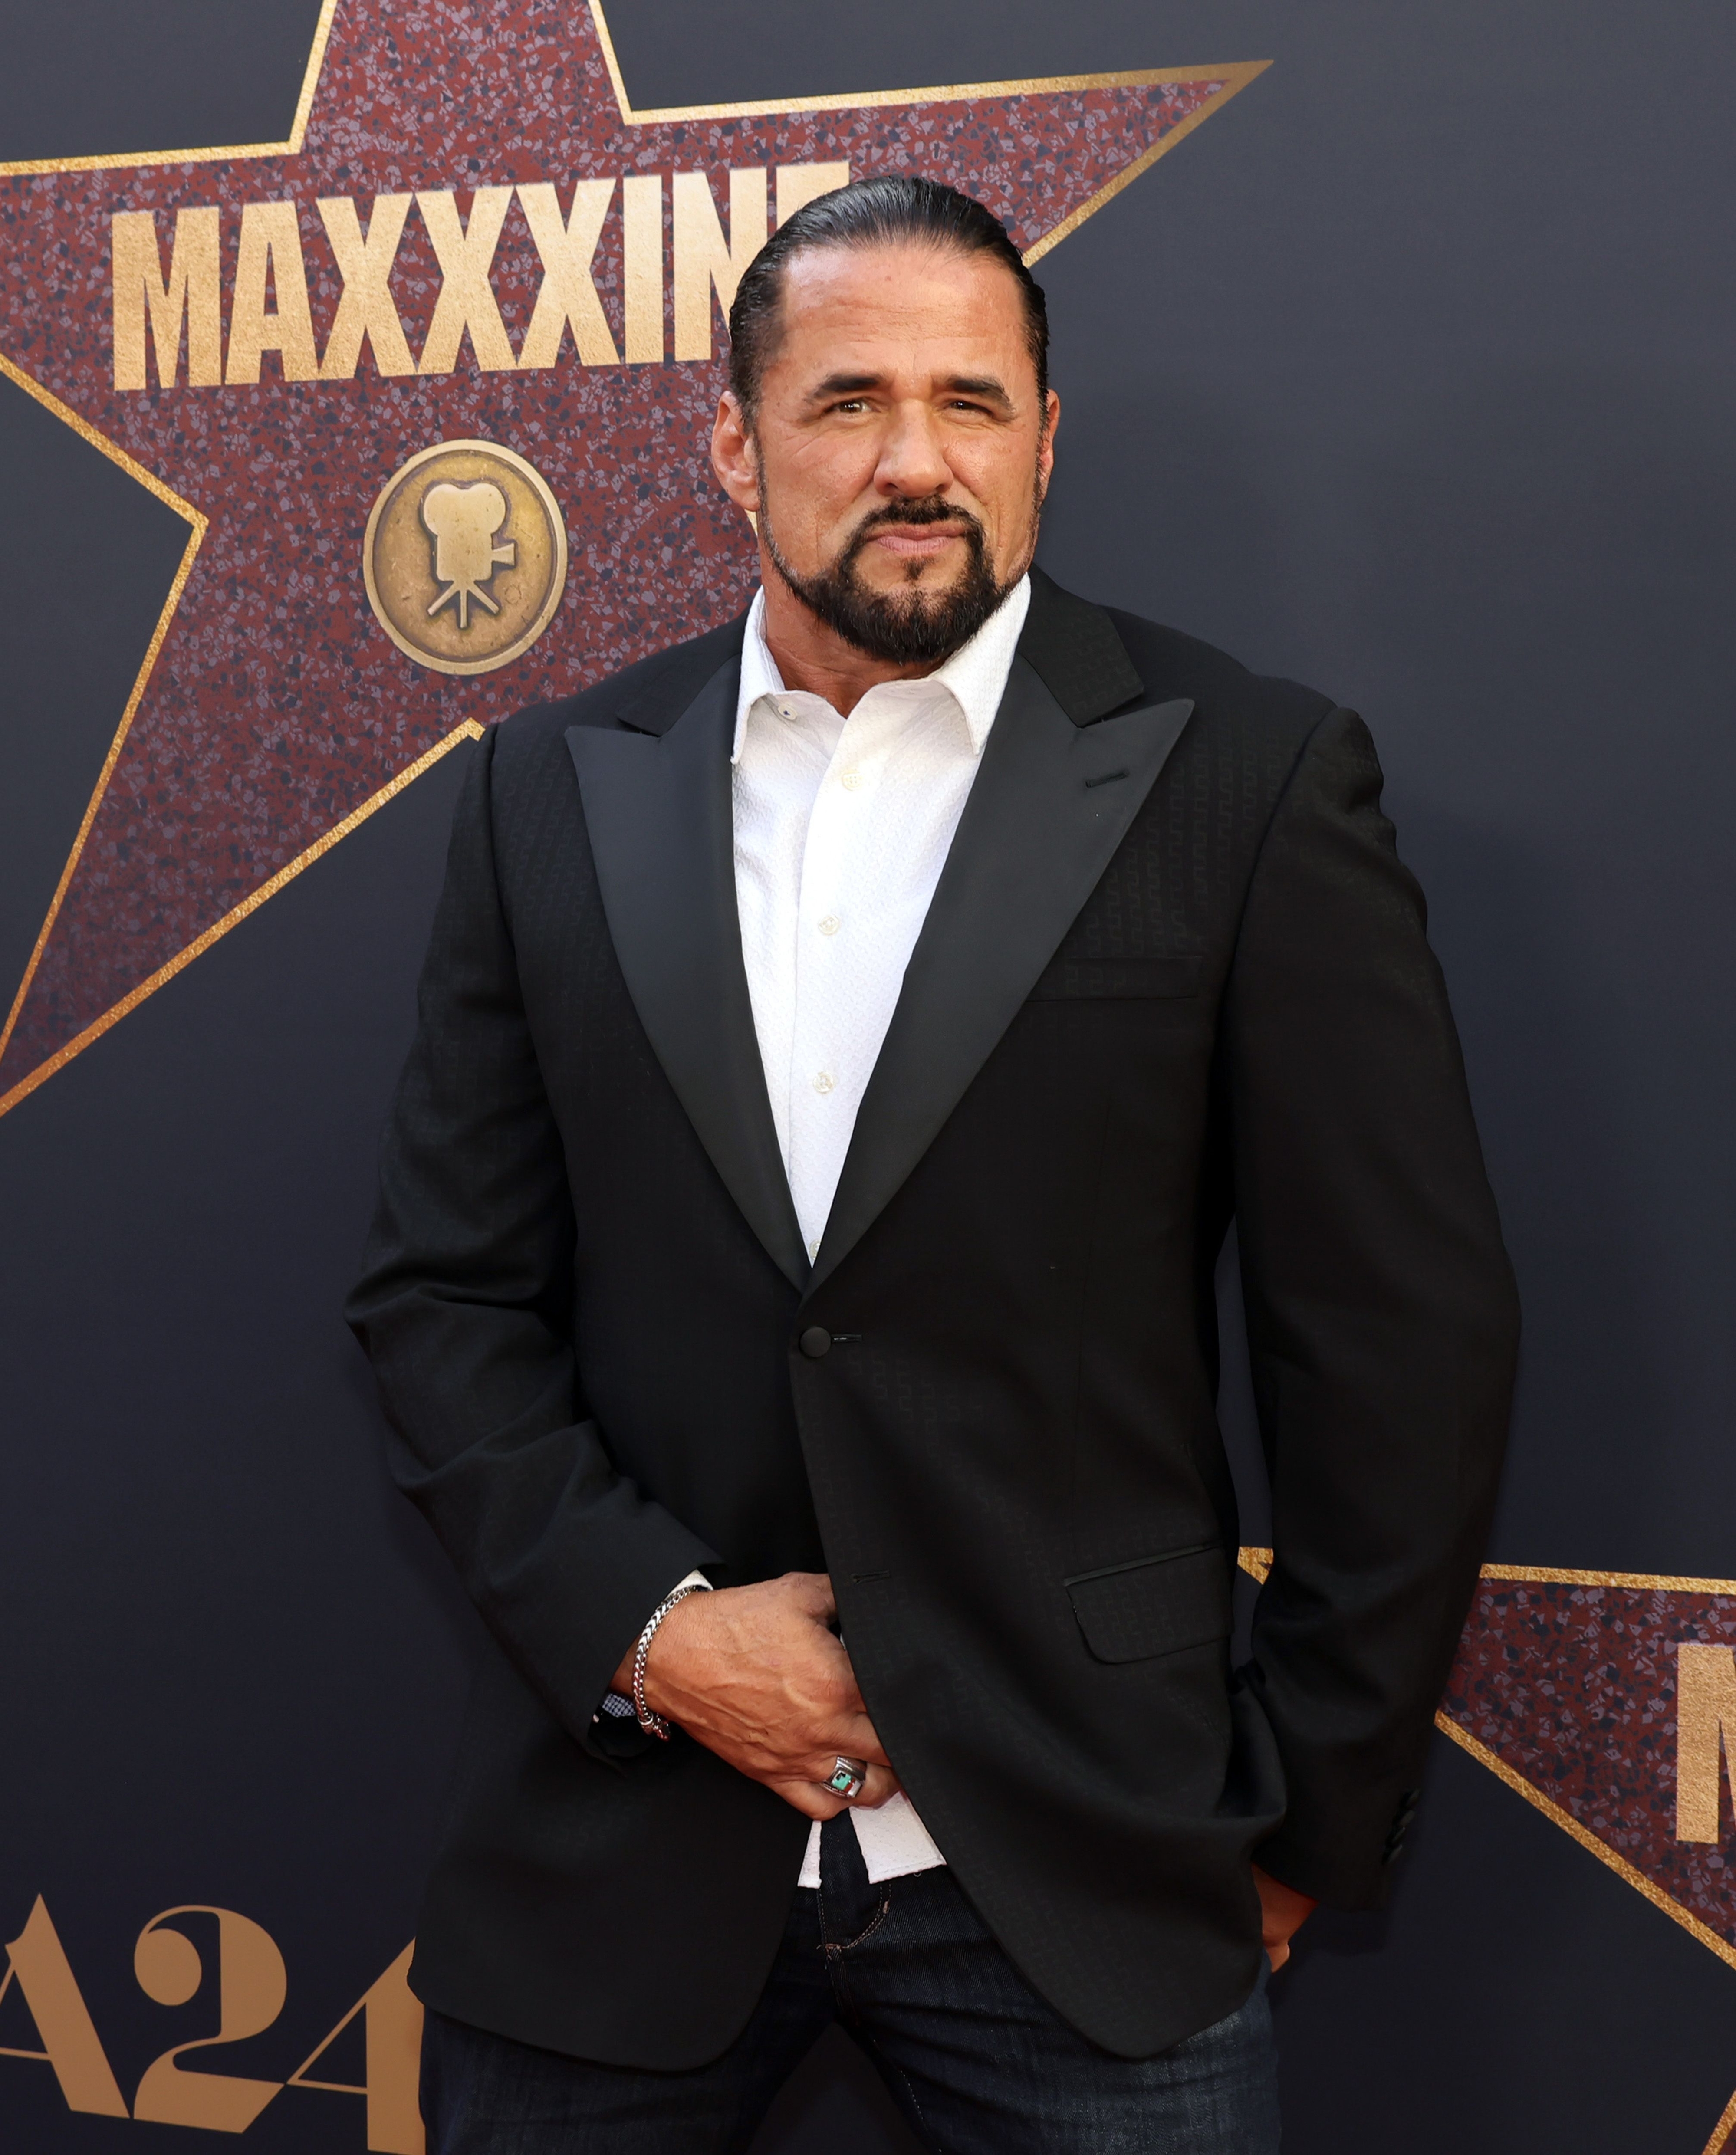 Marcus LaVoi in a suit and tie at the premiere of &quot;MaXXXine&quot;